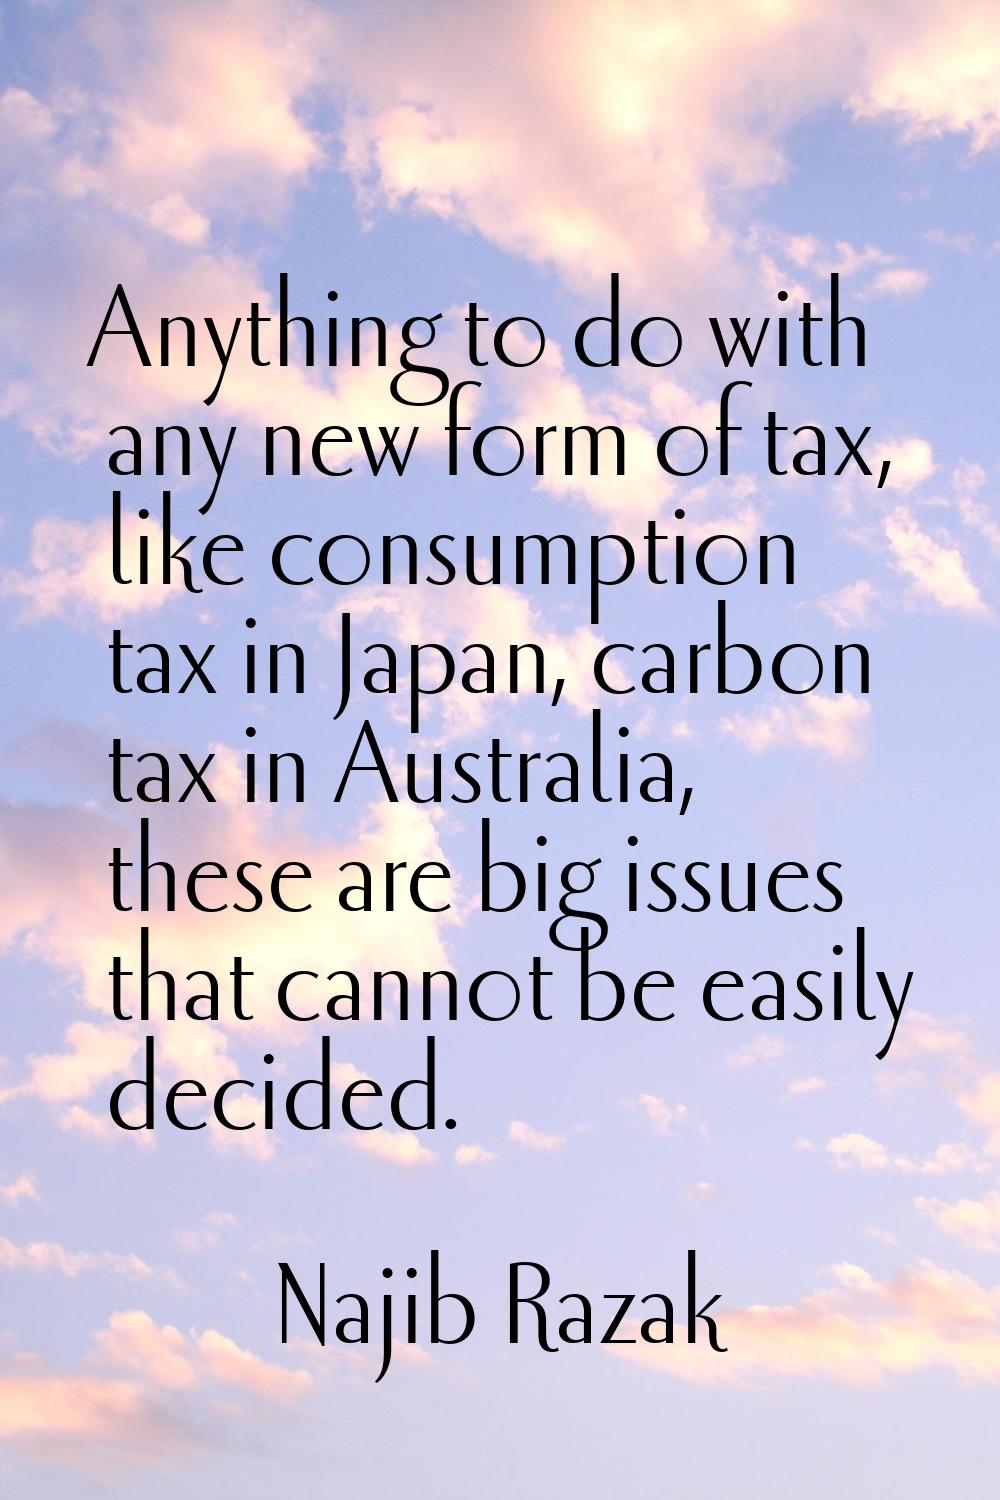 Anything to do with any new form of tax, like consumption tax in Japan, carbon tax in Australia, th